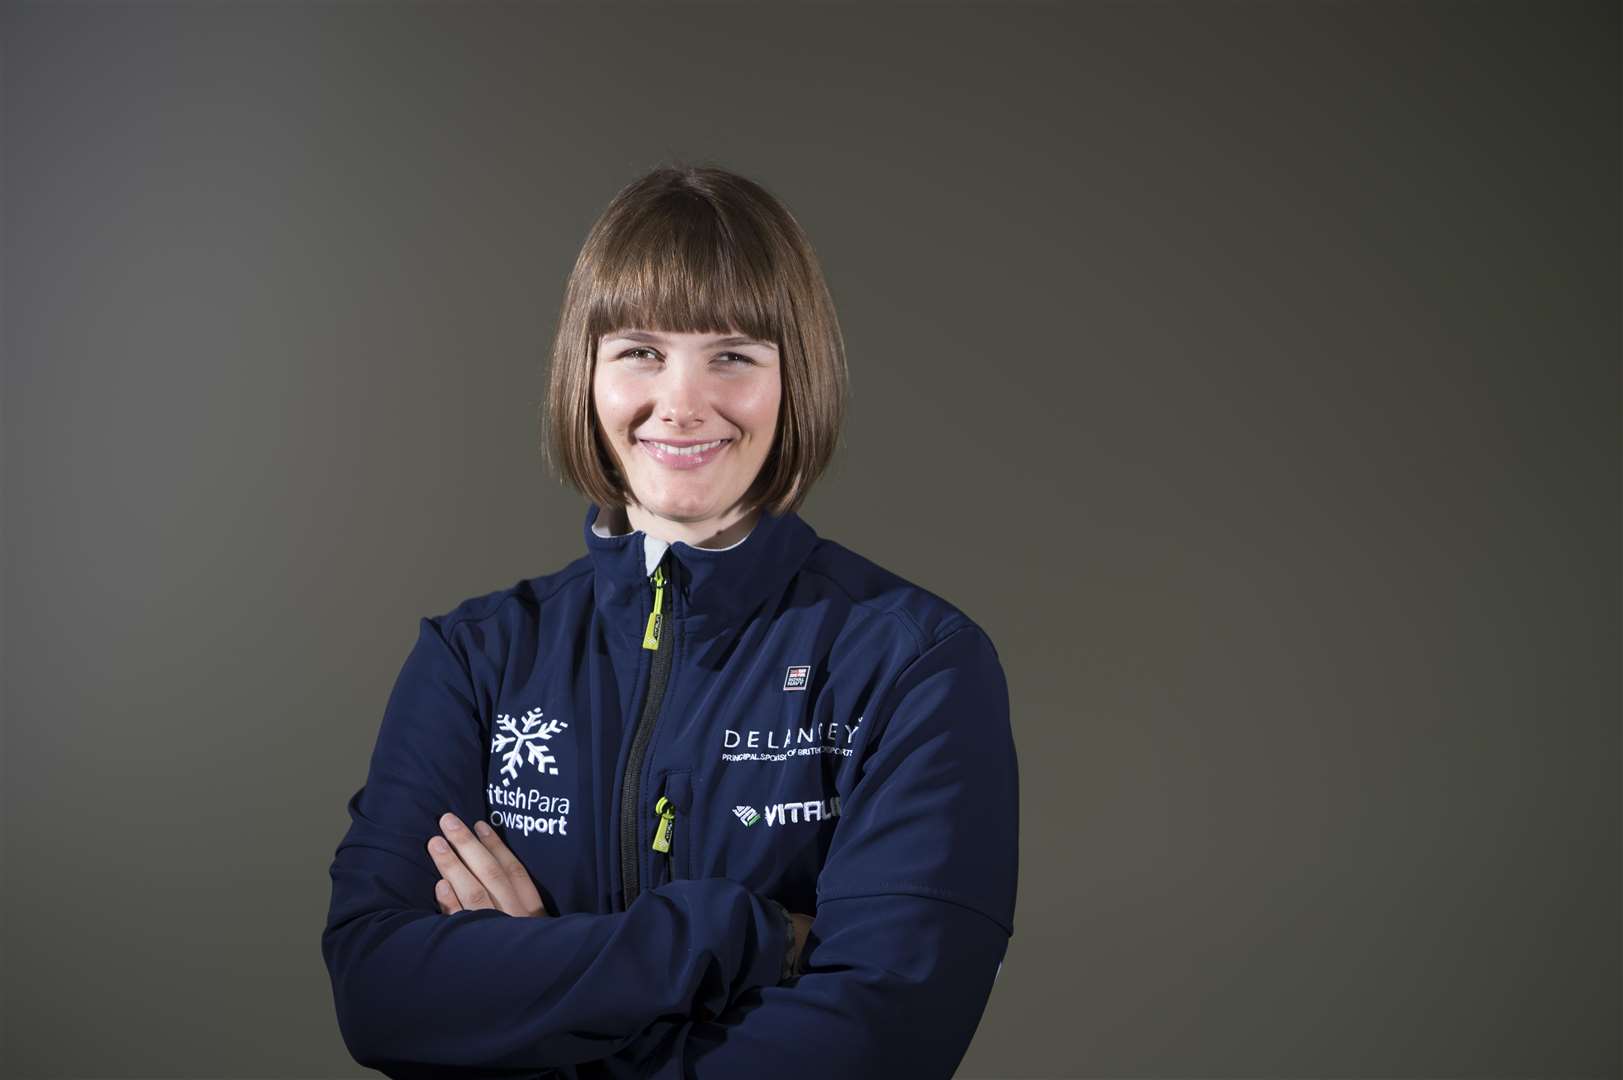 Winter Paralympian and downhill skiiing world champion Millie Knight will speak at the Kent B2B